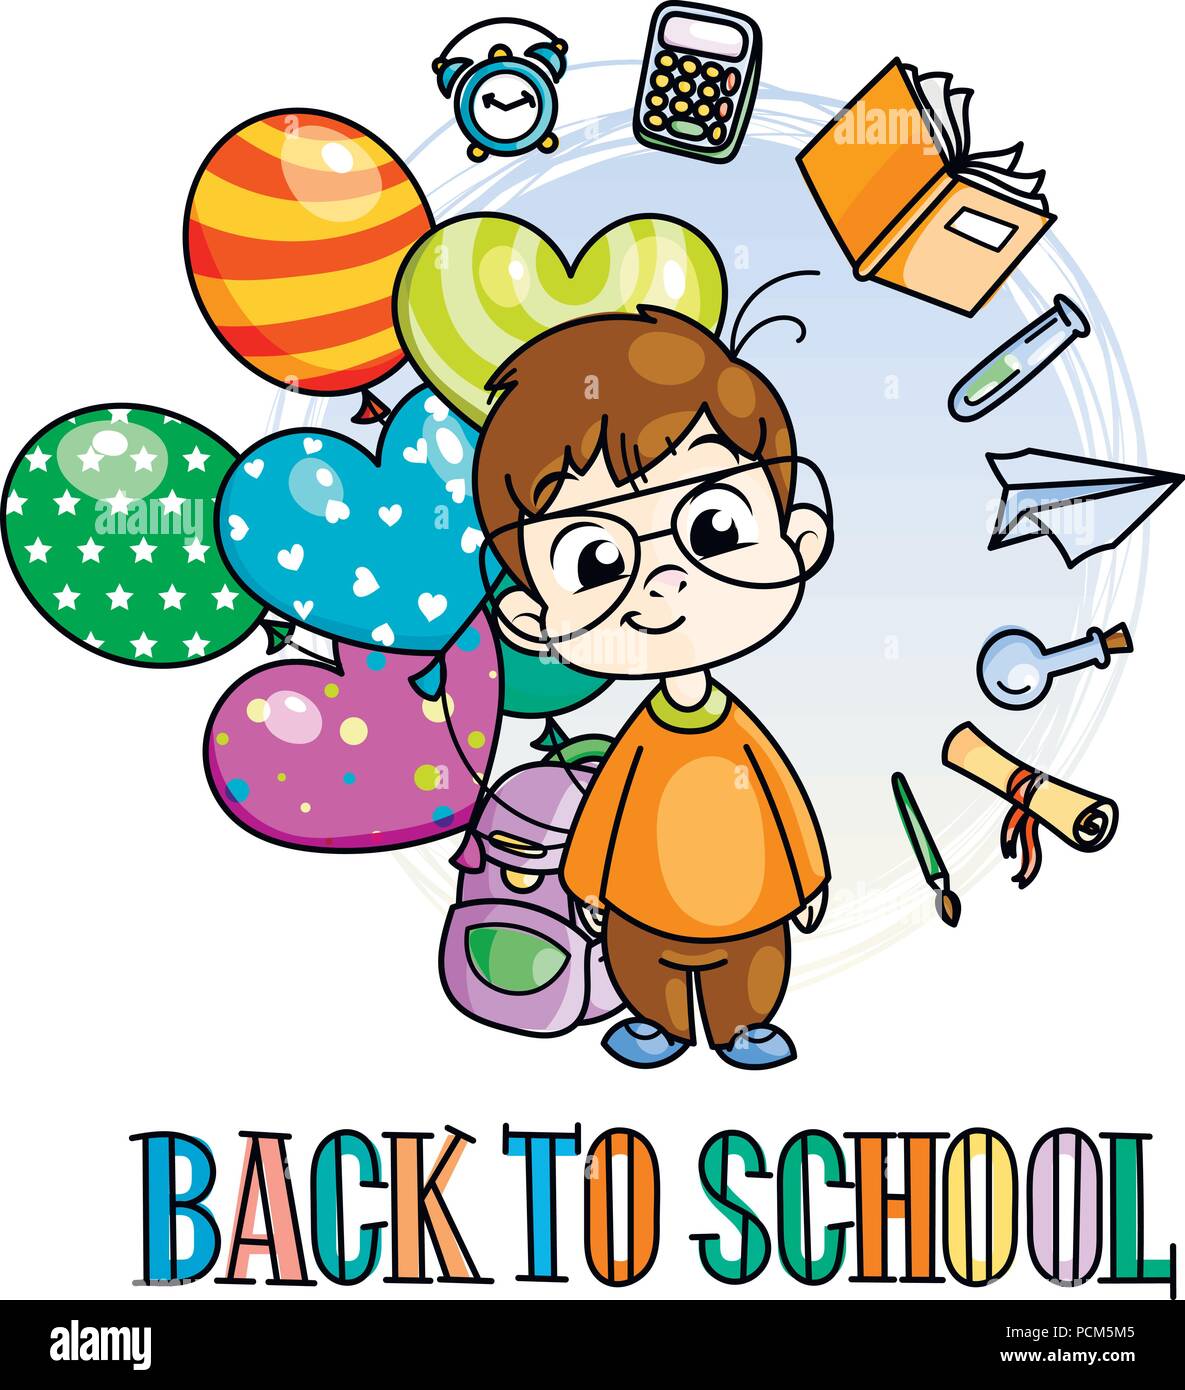 Welcome Back To School Cute School Kid Ready To Education Design Element For Print T Shirt Poster Card Banner Vector Illustration Stock Vector Image Art Alamy